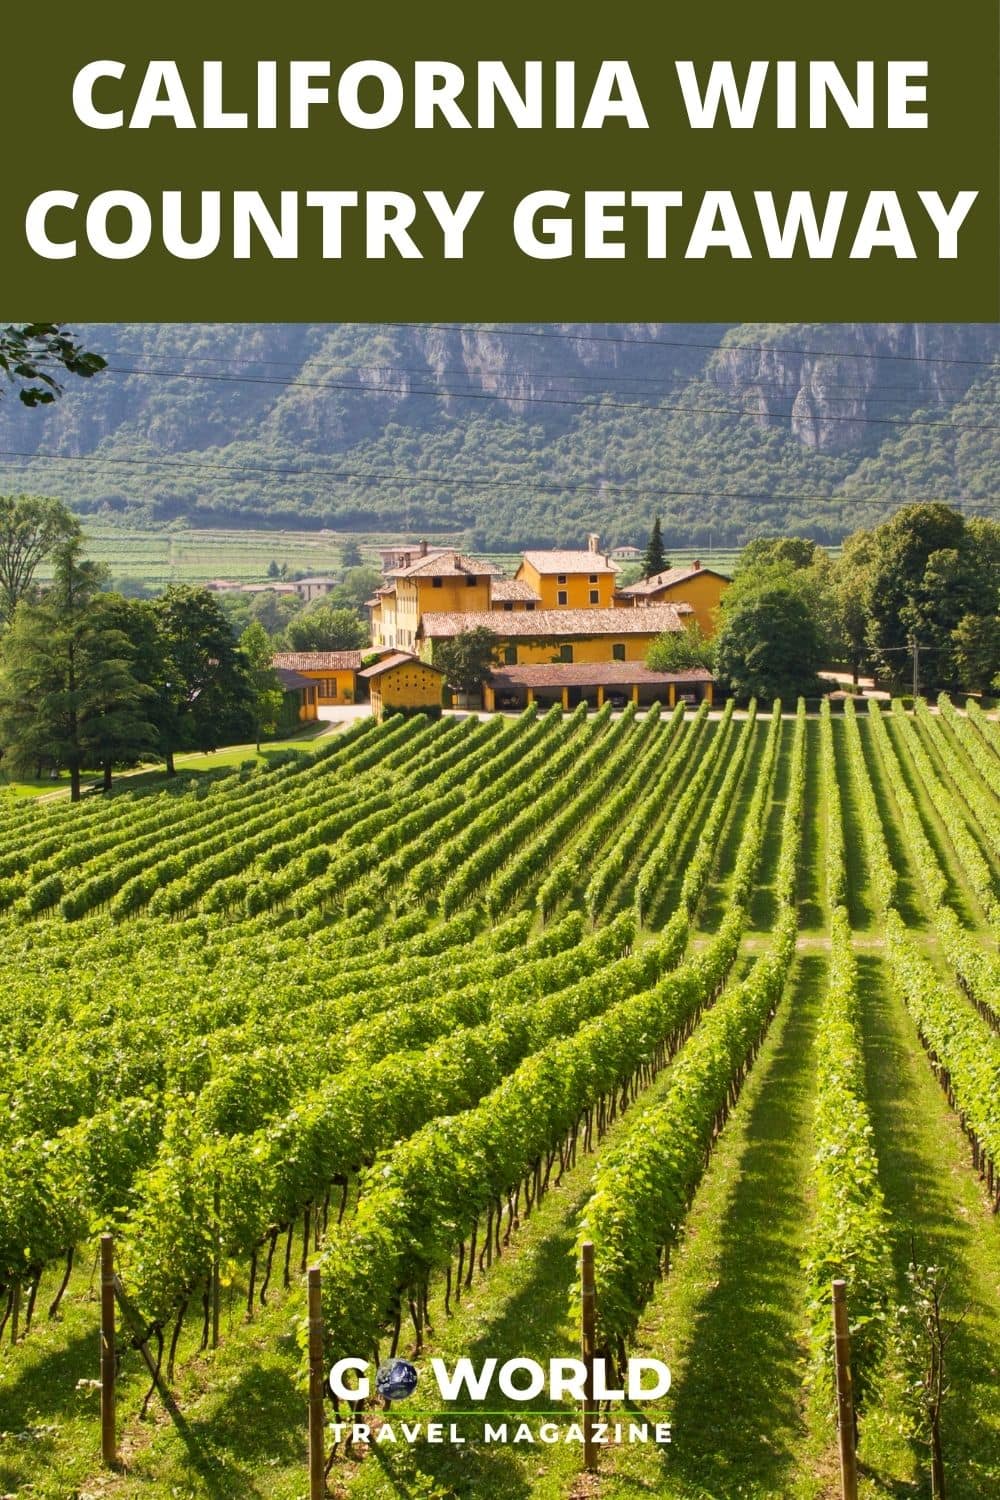 This guide will help you plan the perfect California wine country vacation with tips on where to stay, where to eat and where to taste wine. #Californiawinecountry #sonoma #napavalley